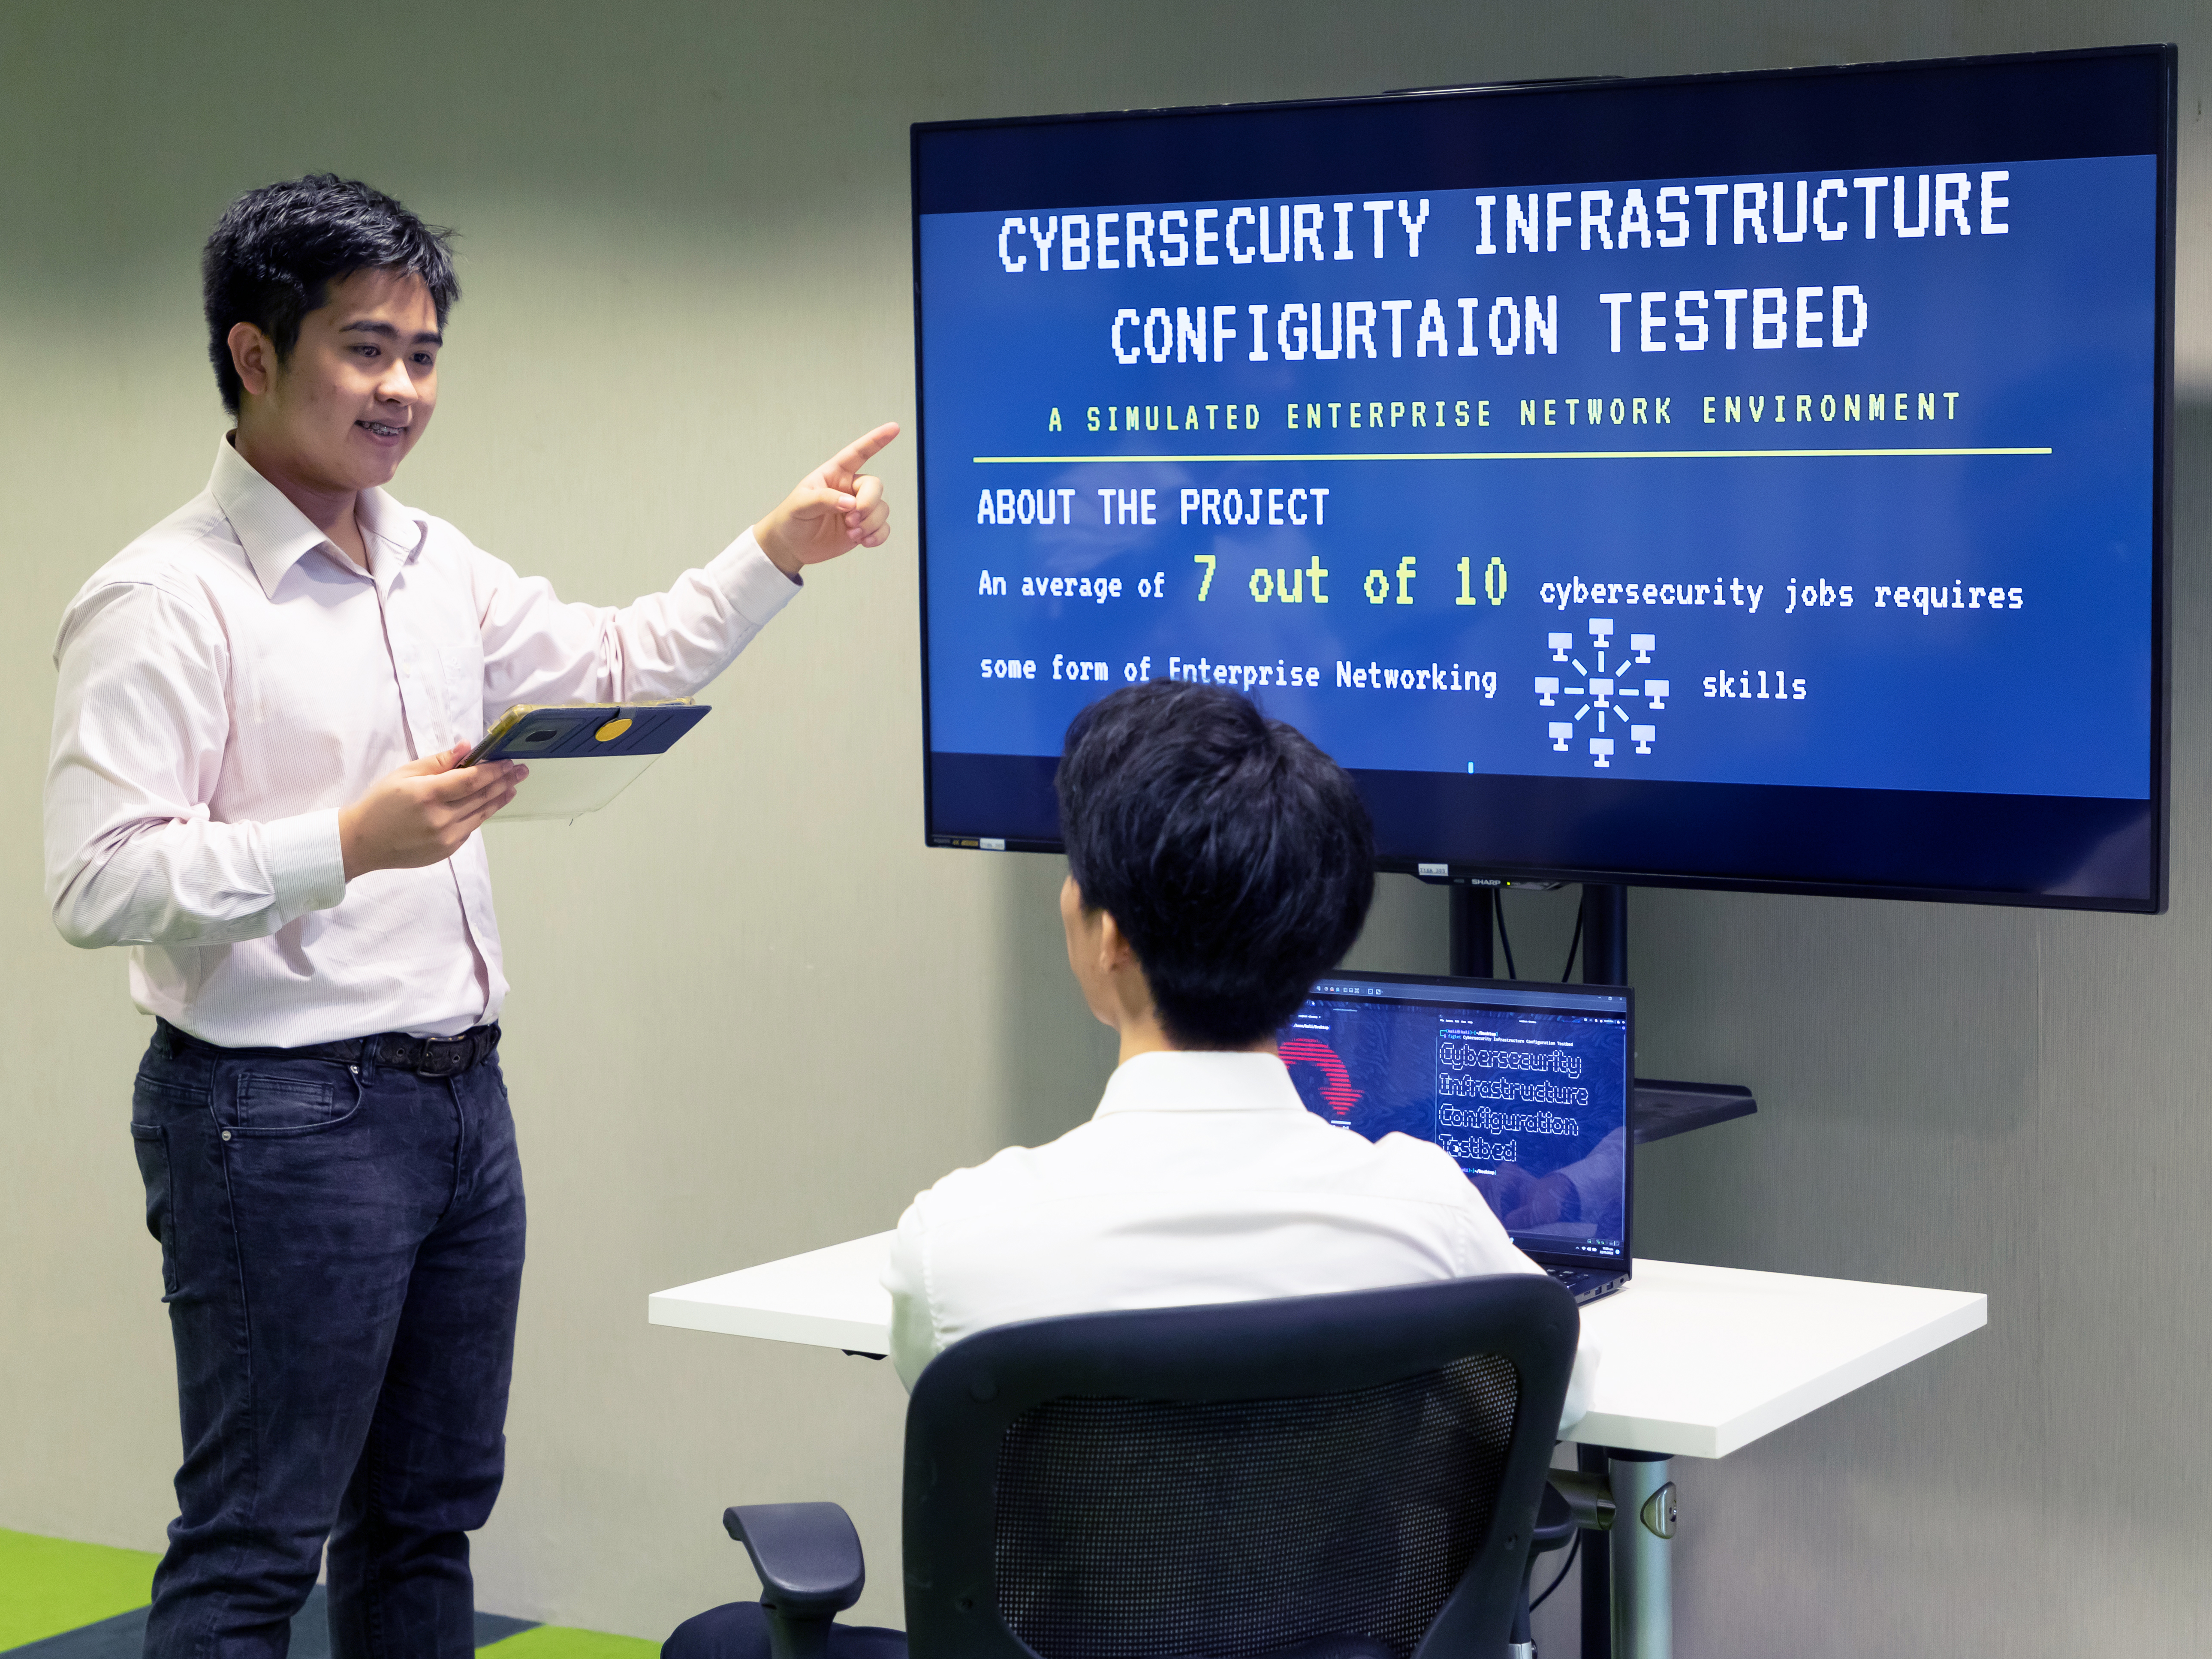 Cyber Security Infrastructure Test Bed